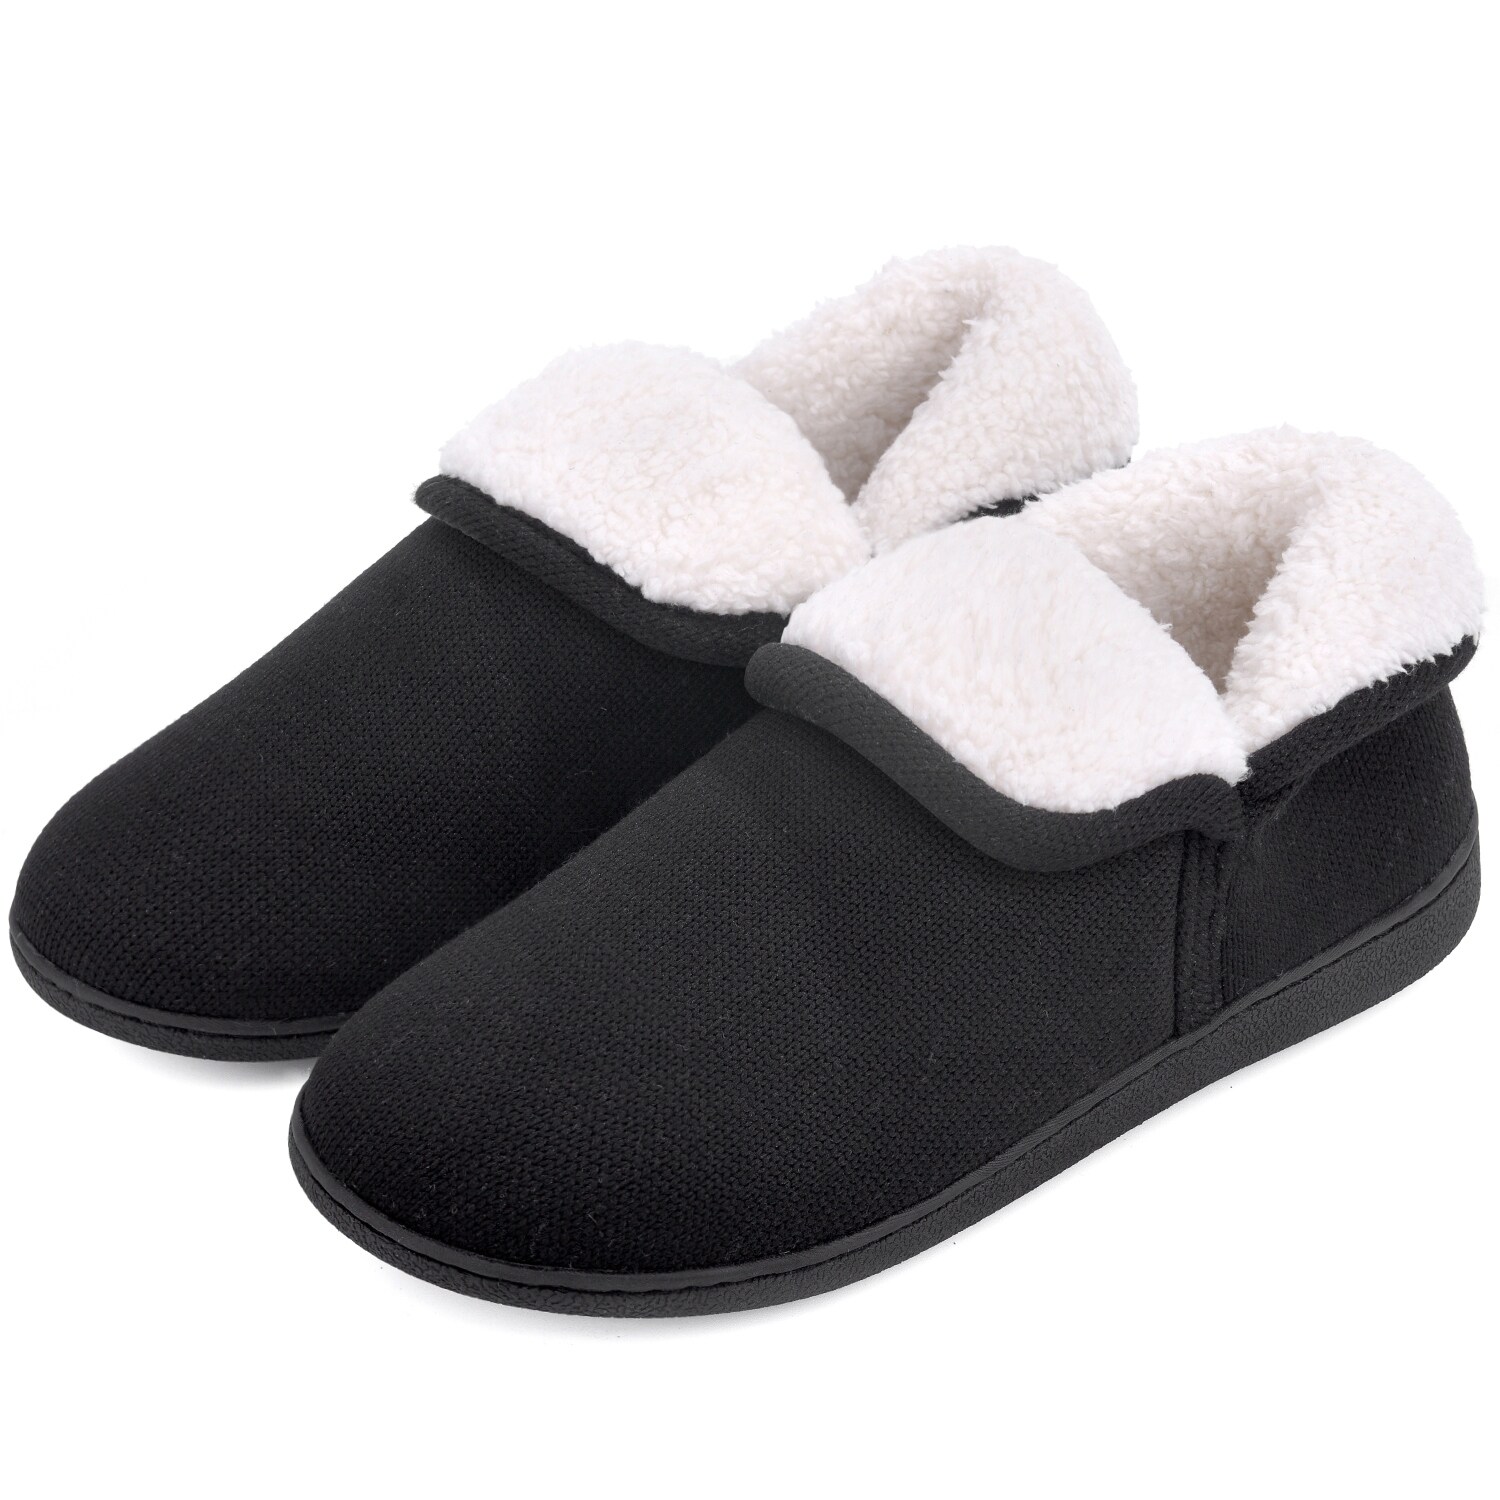 women's house shoes & slippers